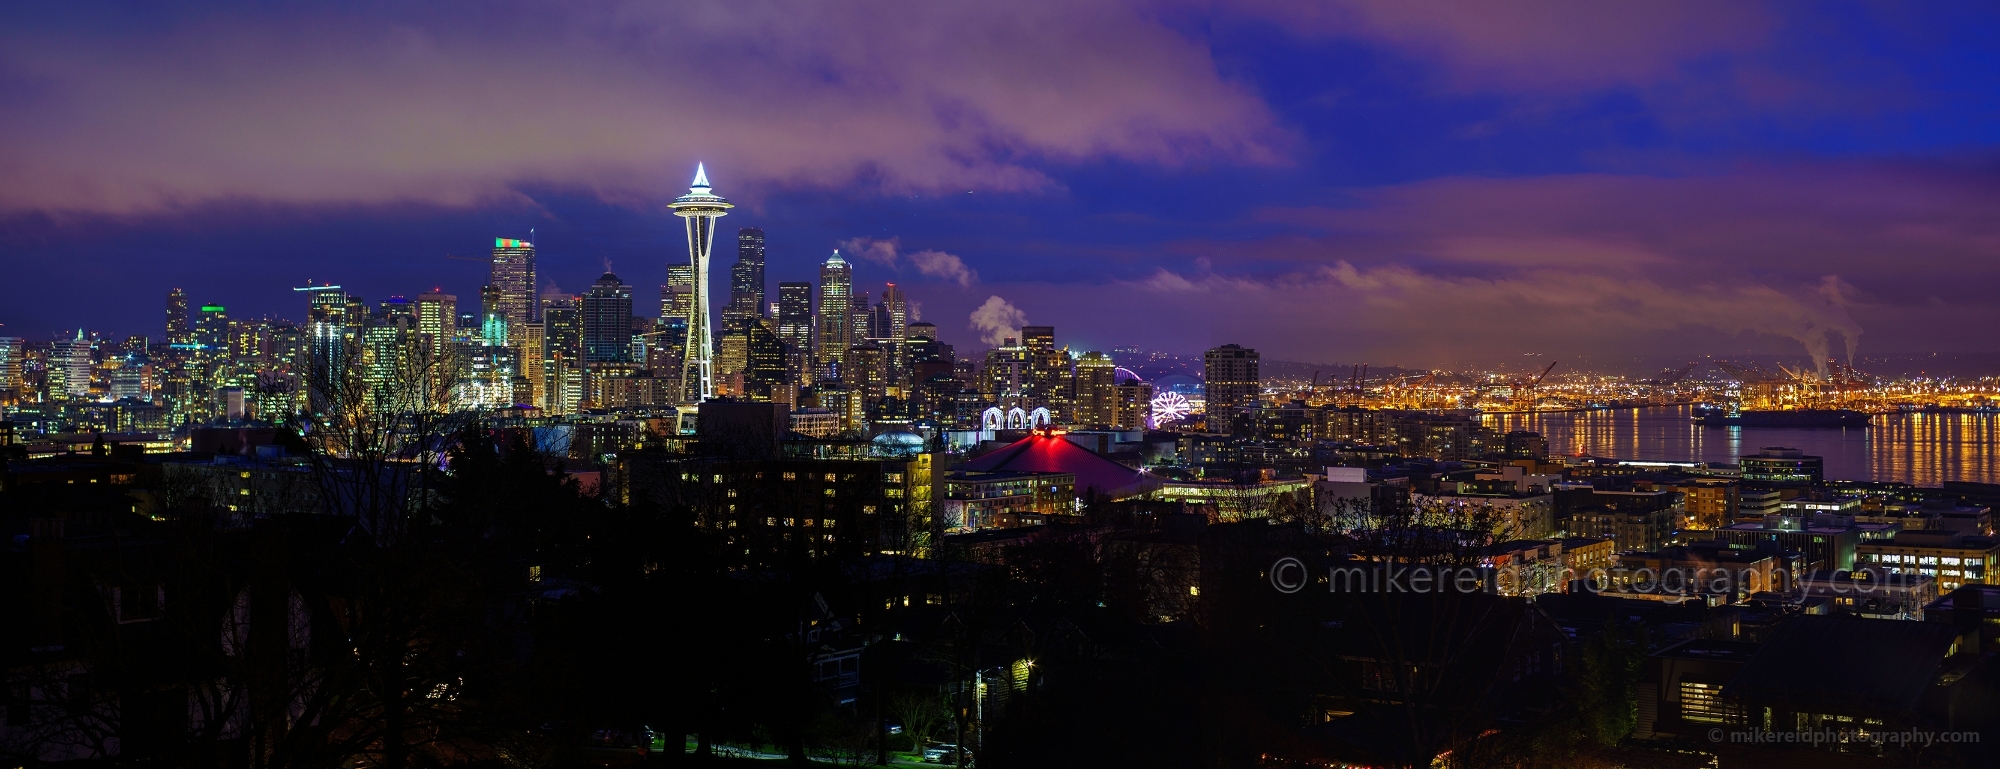 Seattle Kerry Park Photography Night Clouds Panorama.jpg 